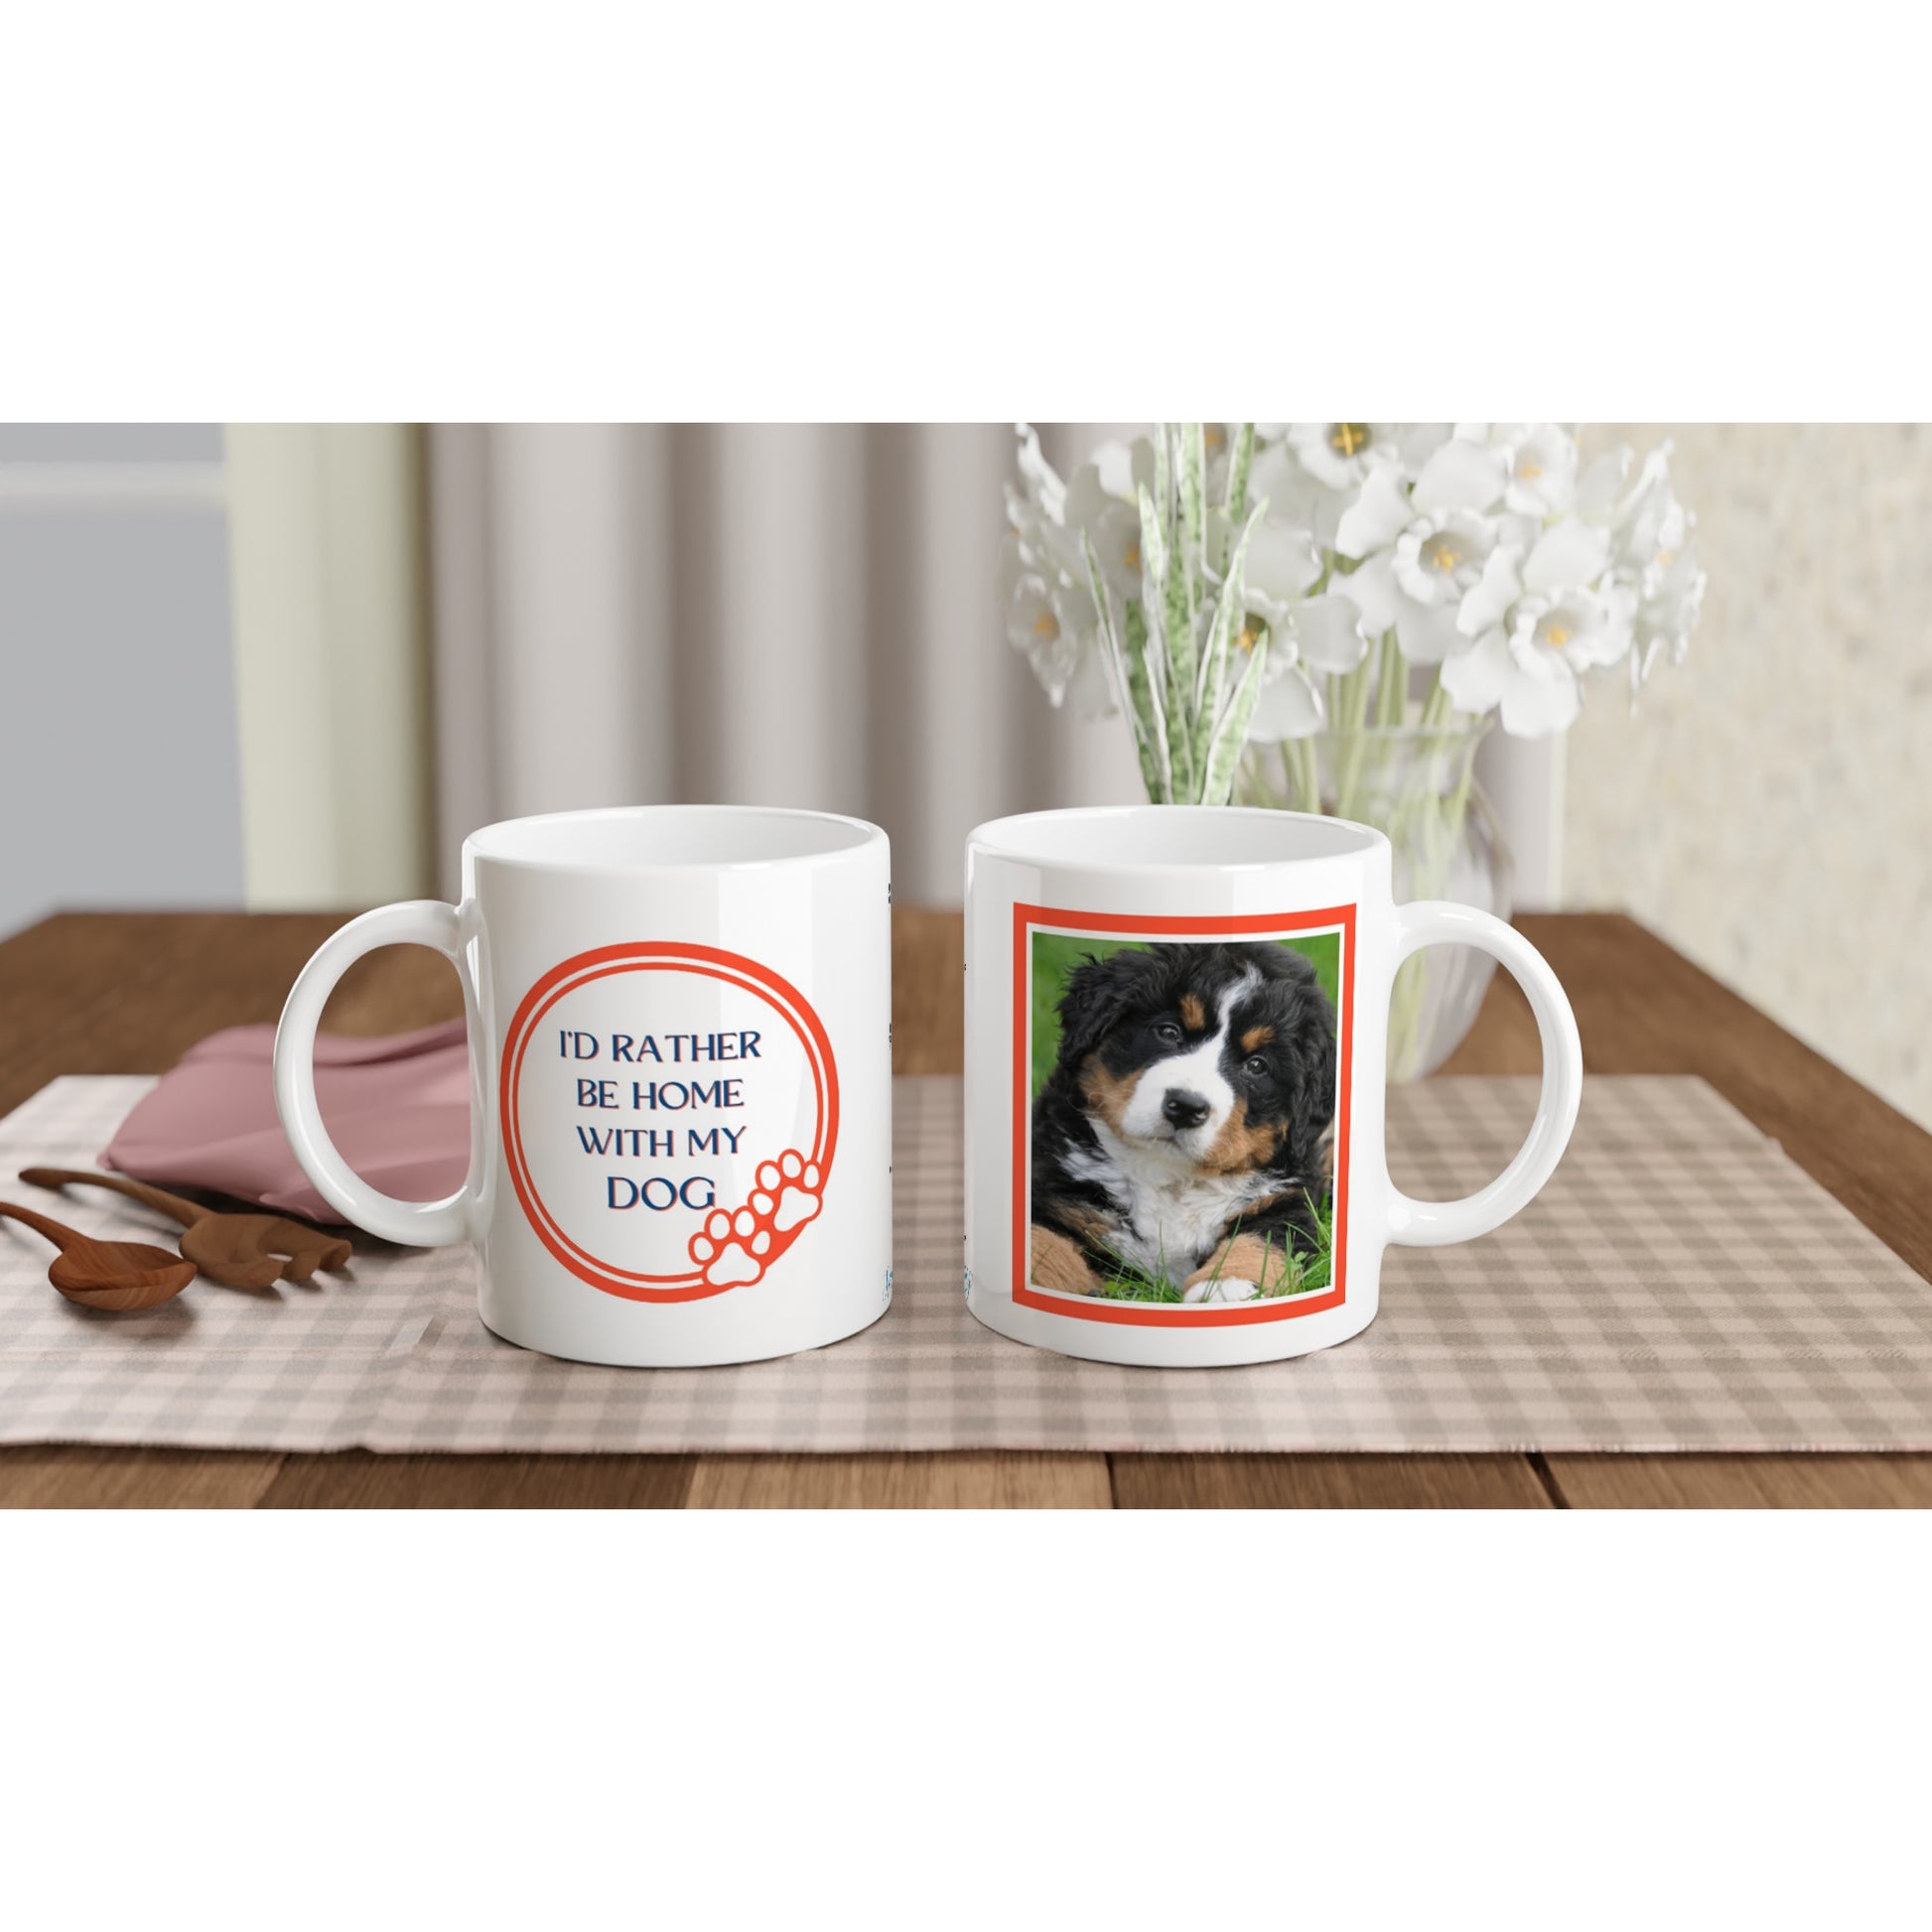 "I'd rather be home with my dog" Customizable Photo 11 oz. Mug front and back view sitting on table